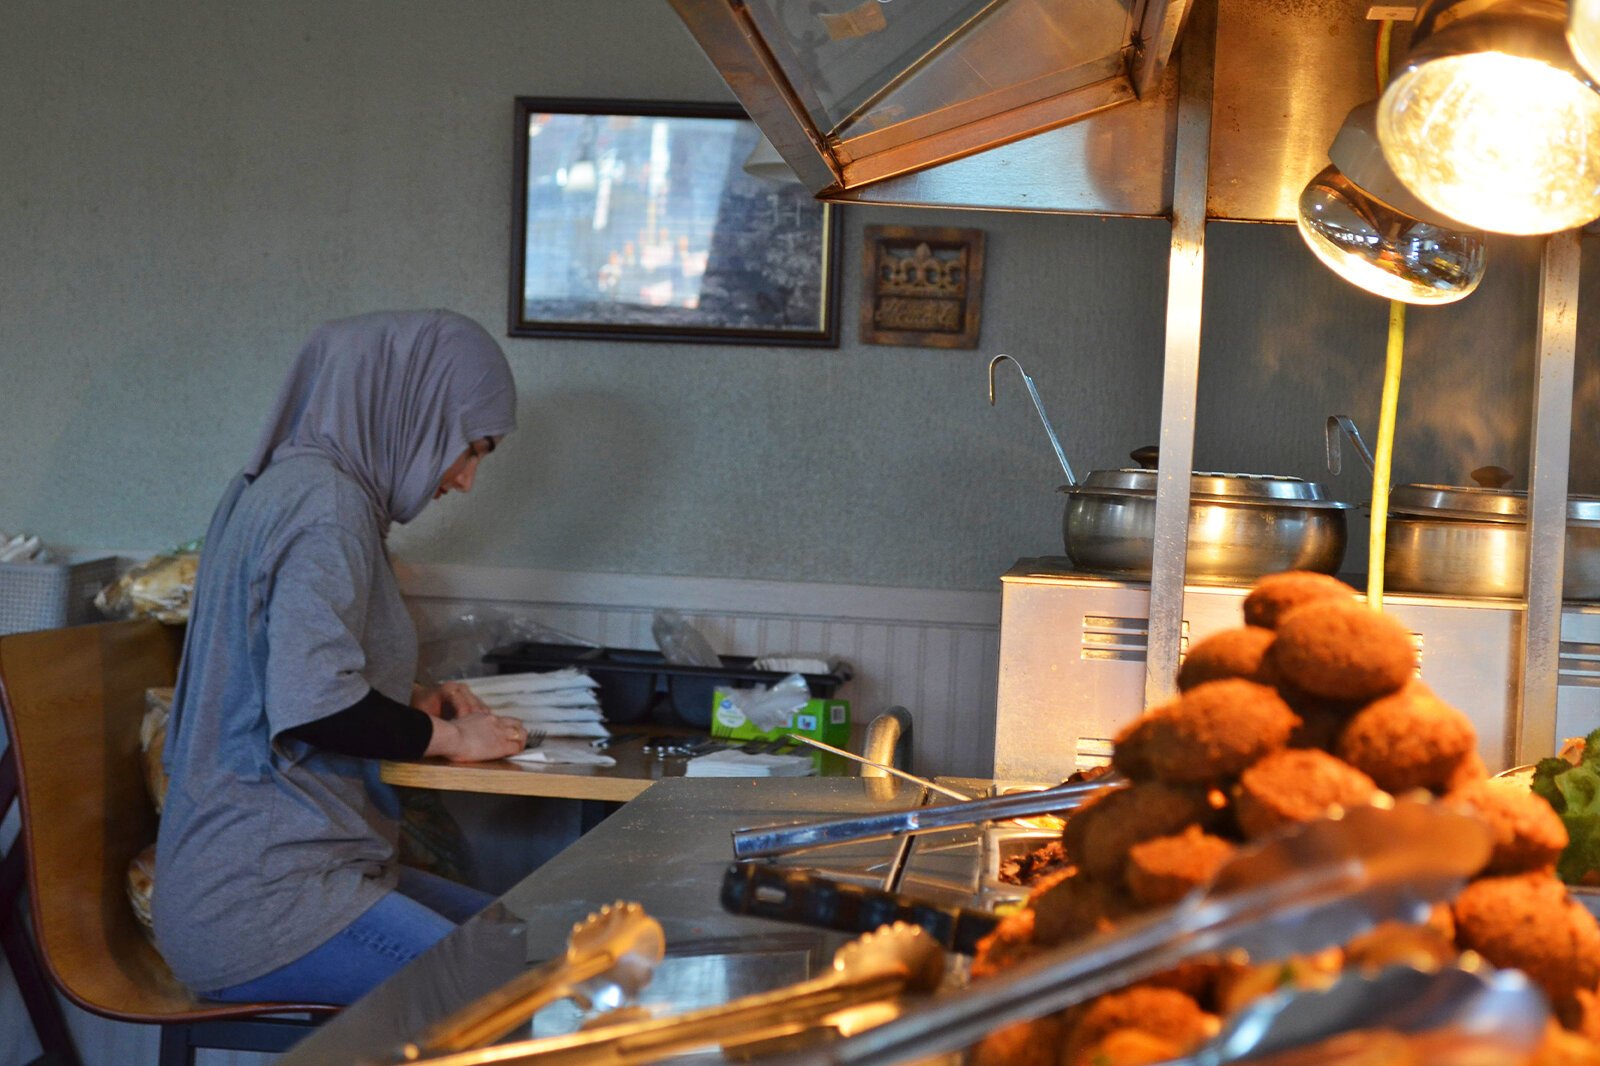 Shawarma King is a family-owned and operated business. One of the owners' daughters rolls silverware in preparation for the lunch rush.